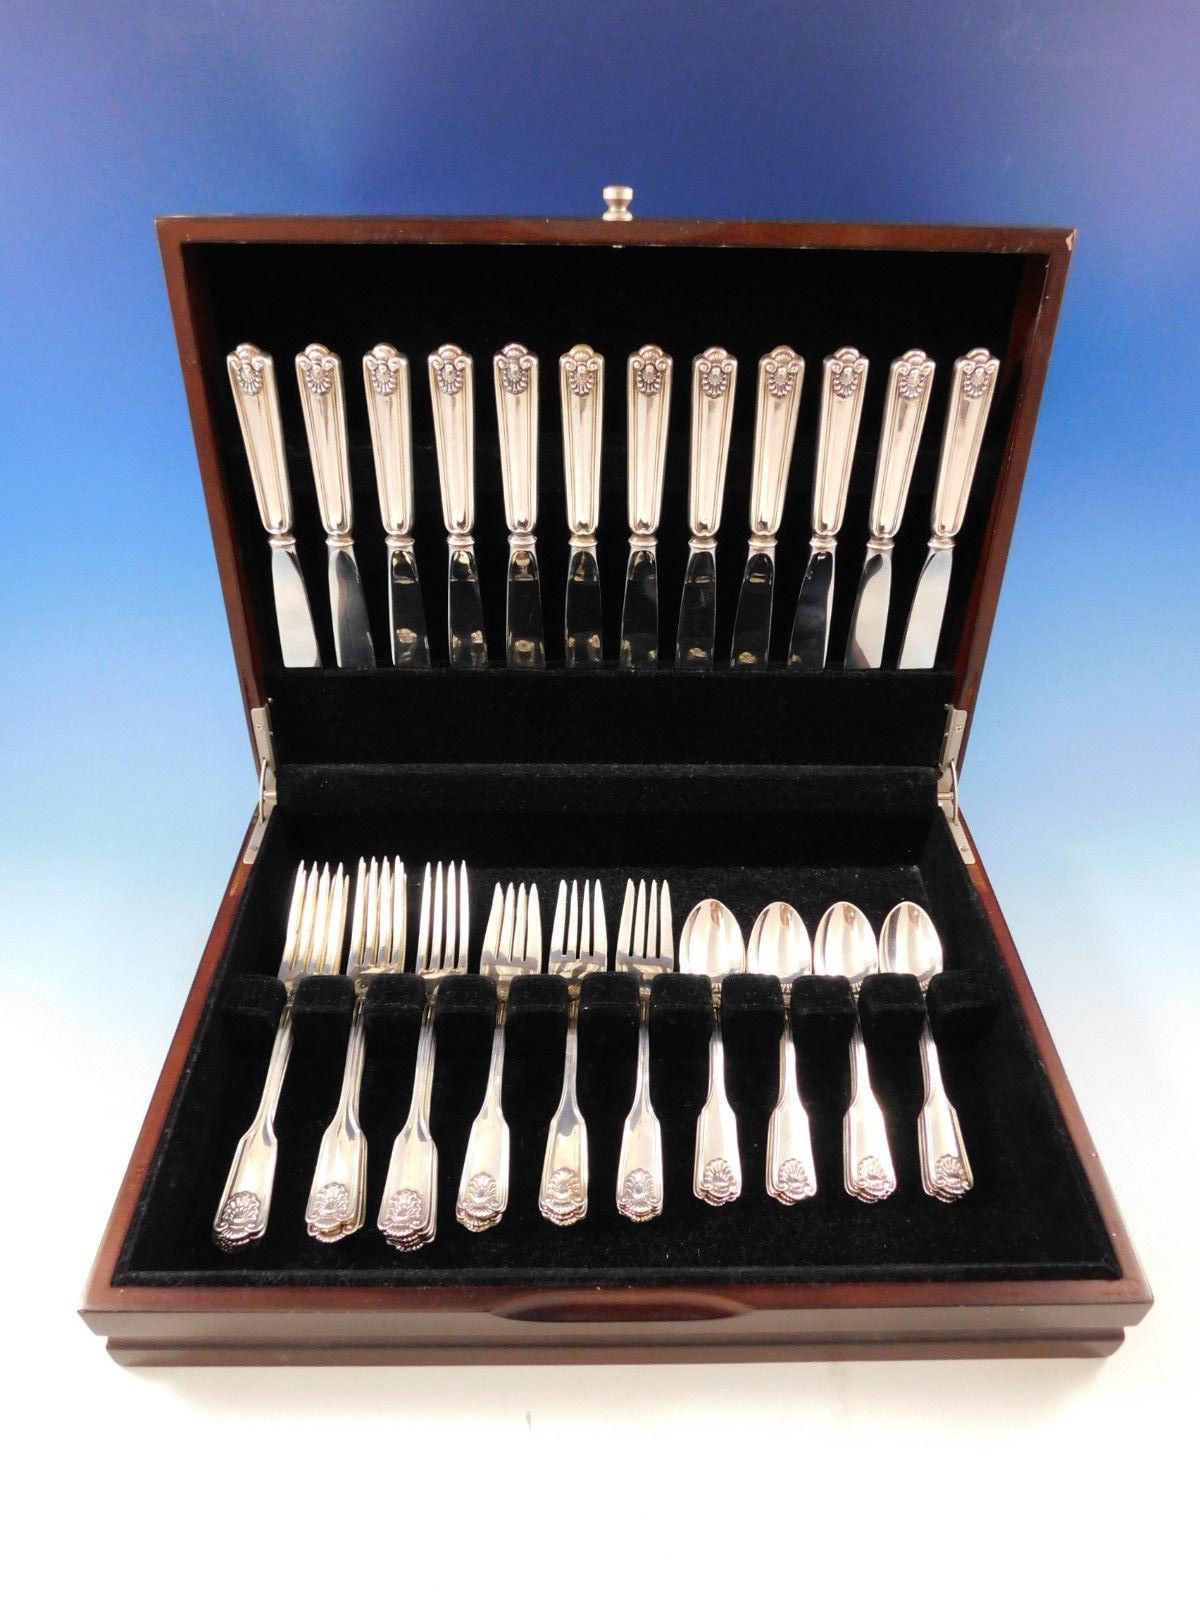 Fiddle shell by Frank Smith sterling silver flatware set, 48 pieces. This set includes:

12 knives, 8 5/8